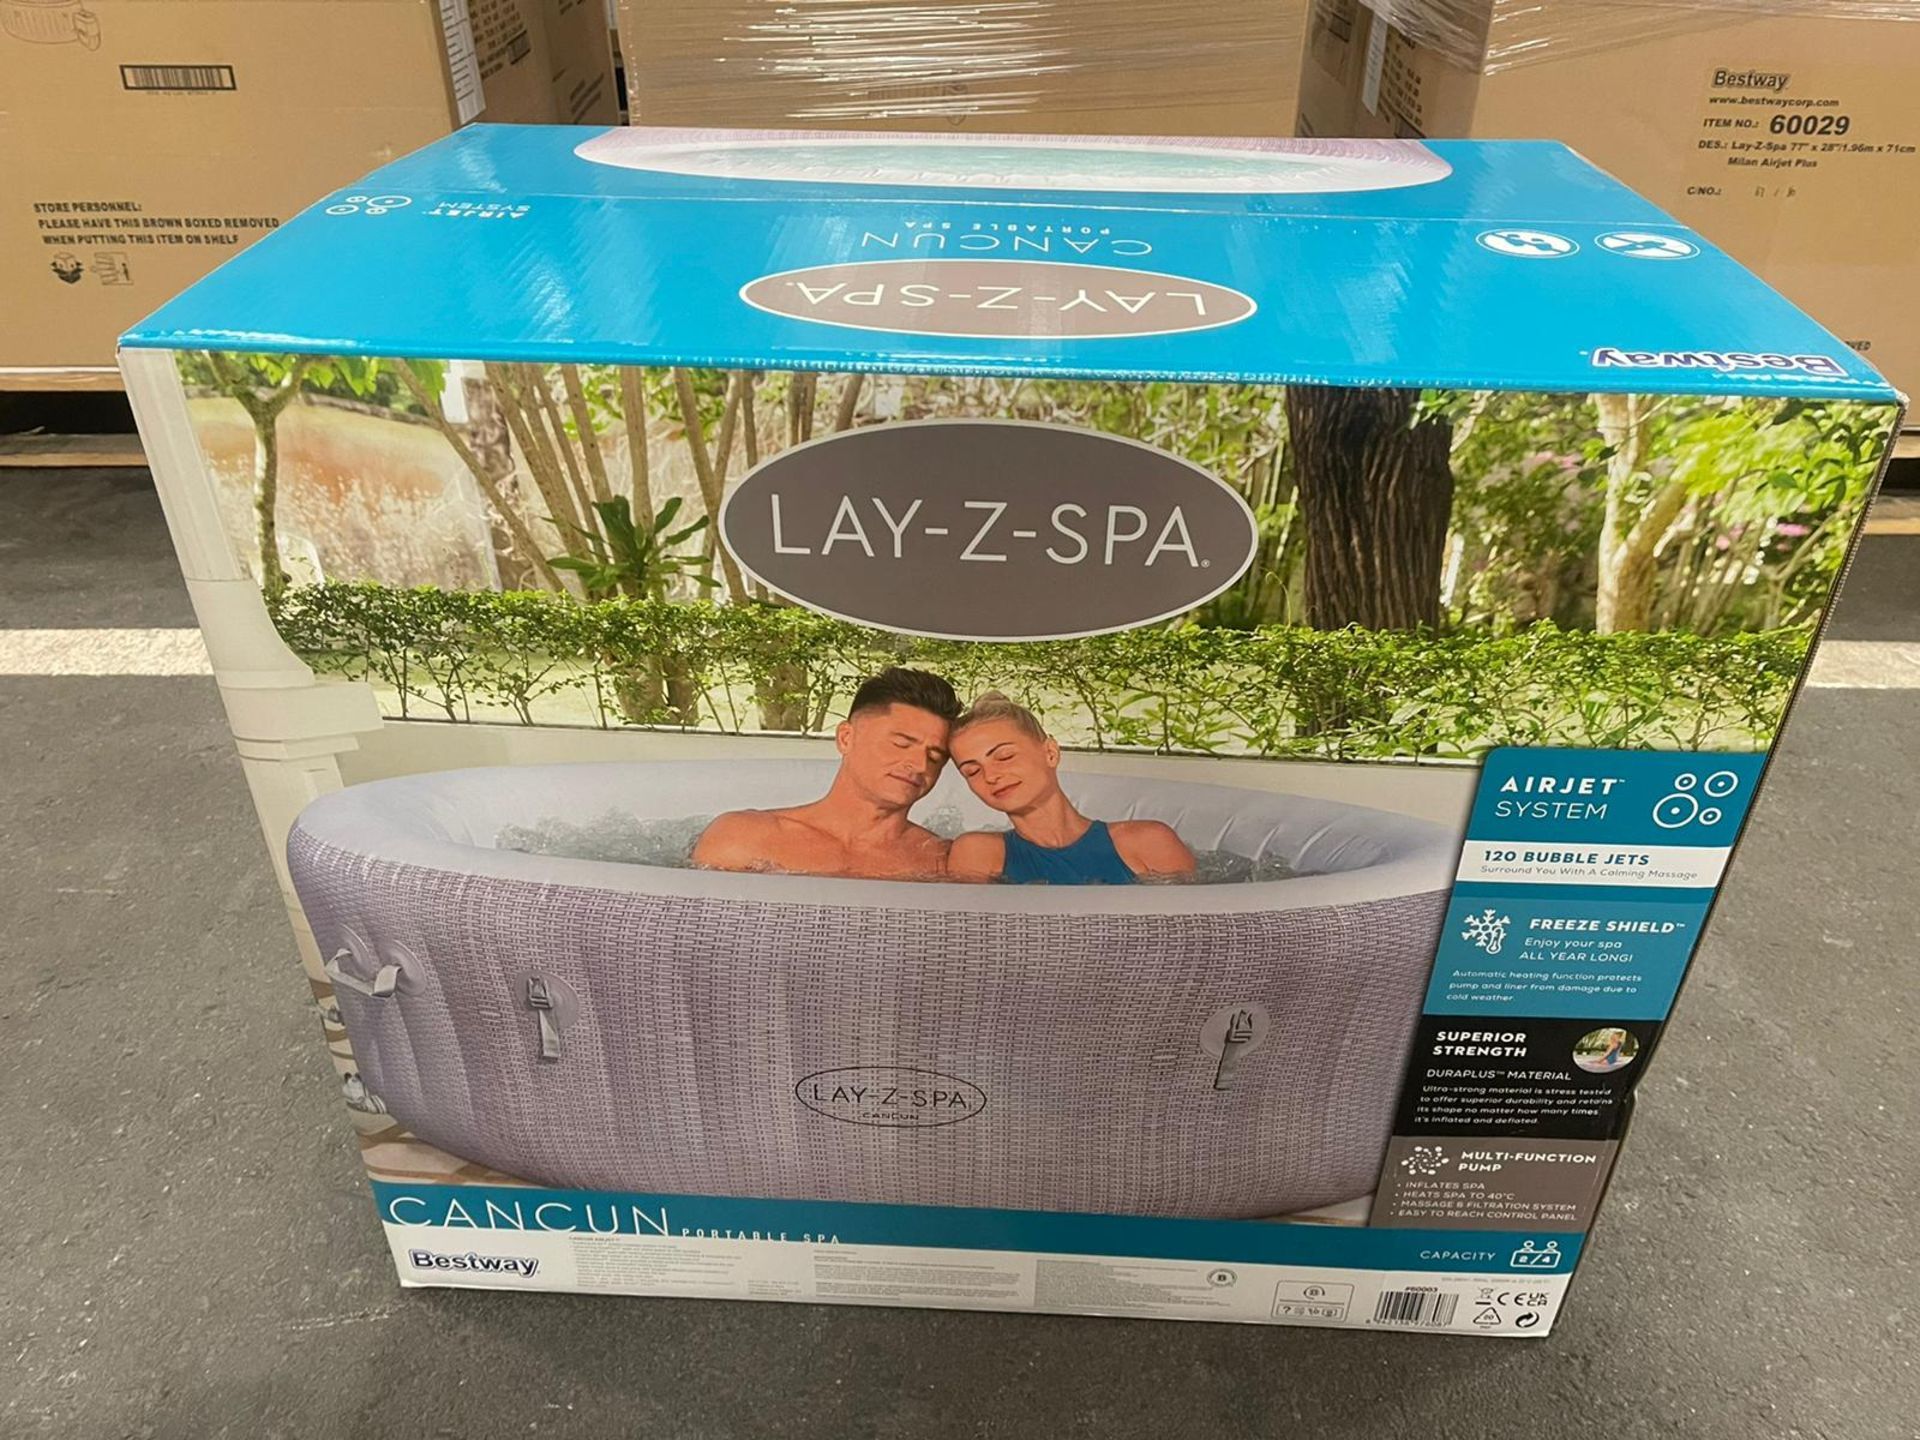 RRP £529.99 - Lay-Z-Spa Cancun Hot Tub, 120 AirJet Rattan Design Inflatable Spa with Freeze Shield - Image 4 of 4